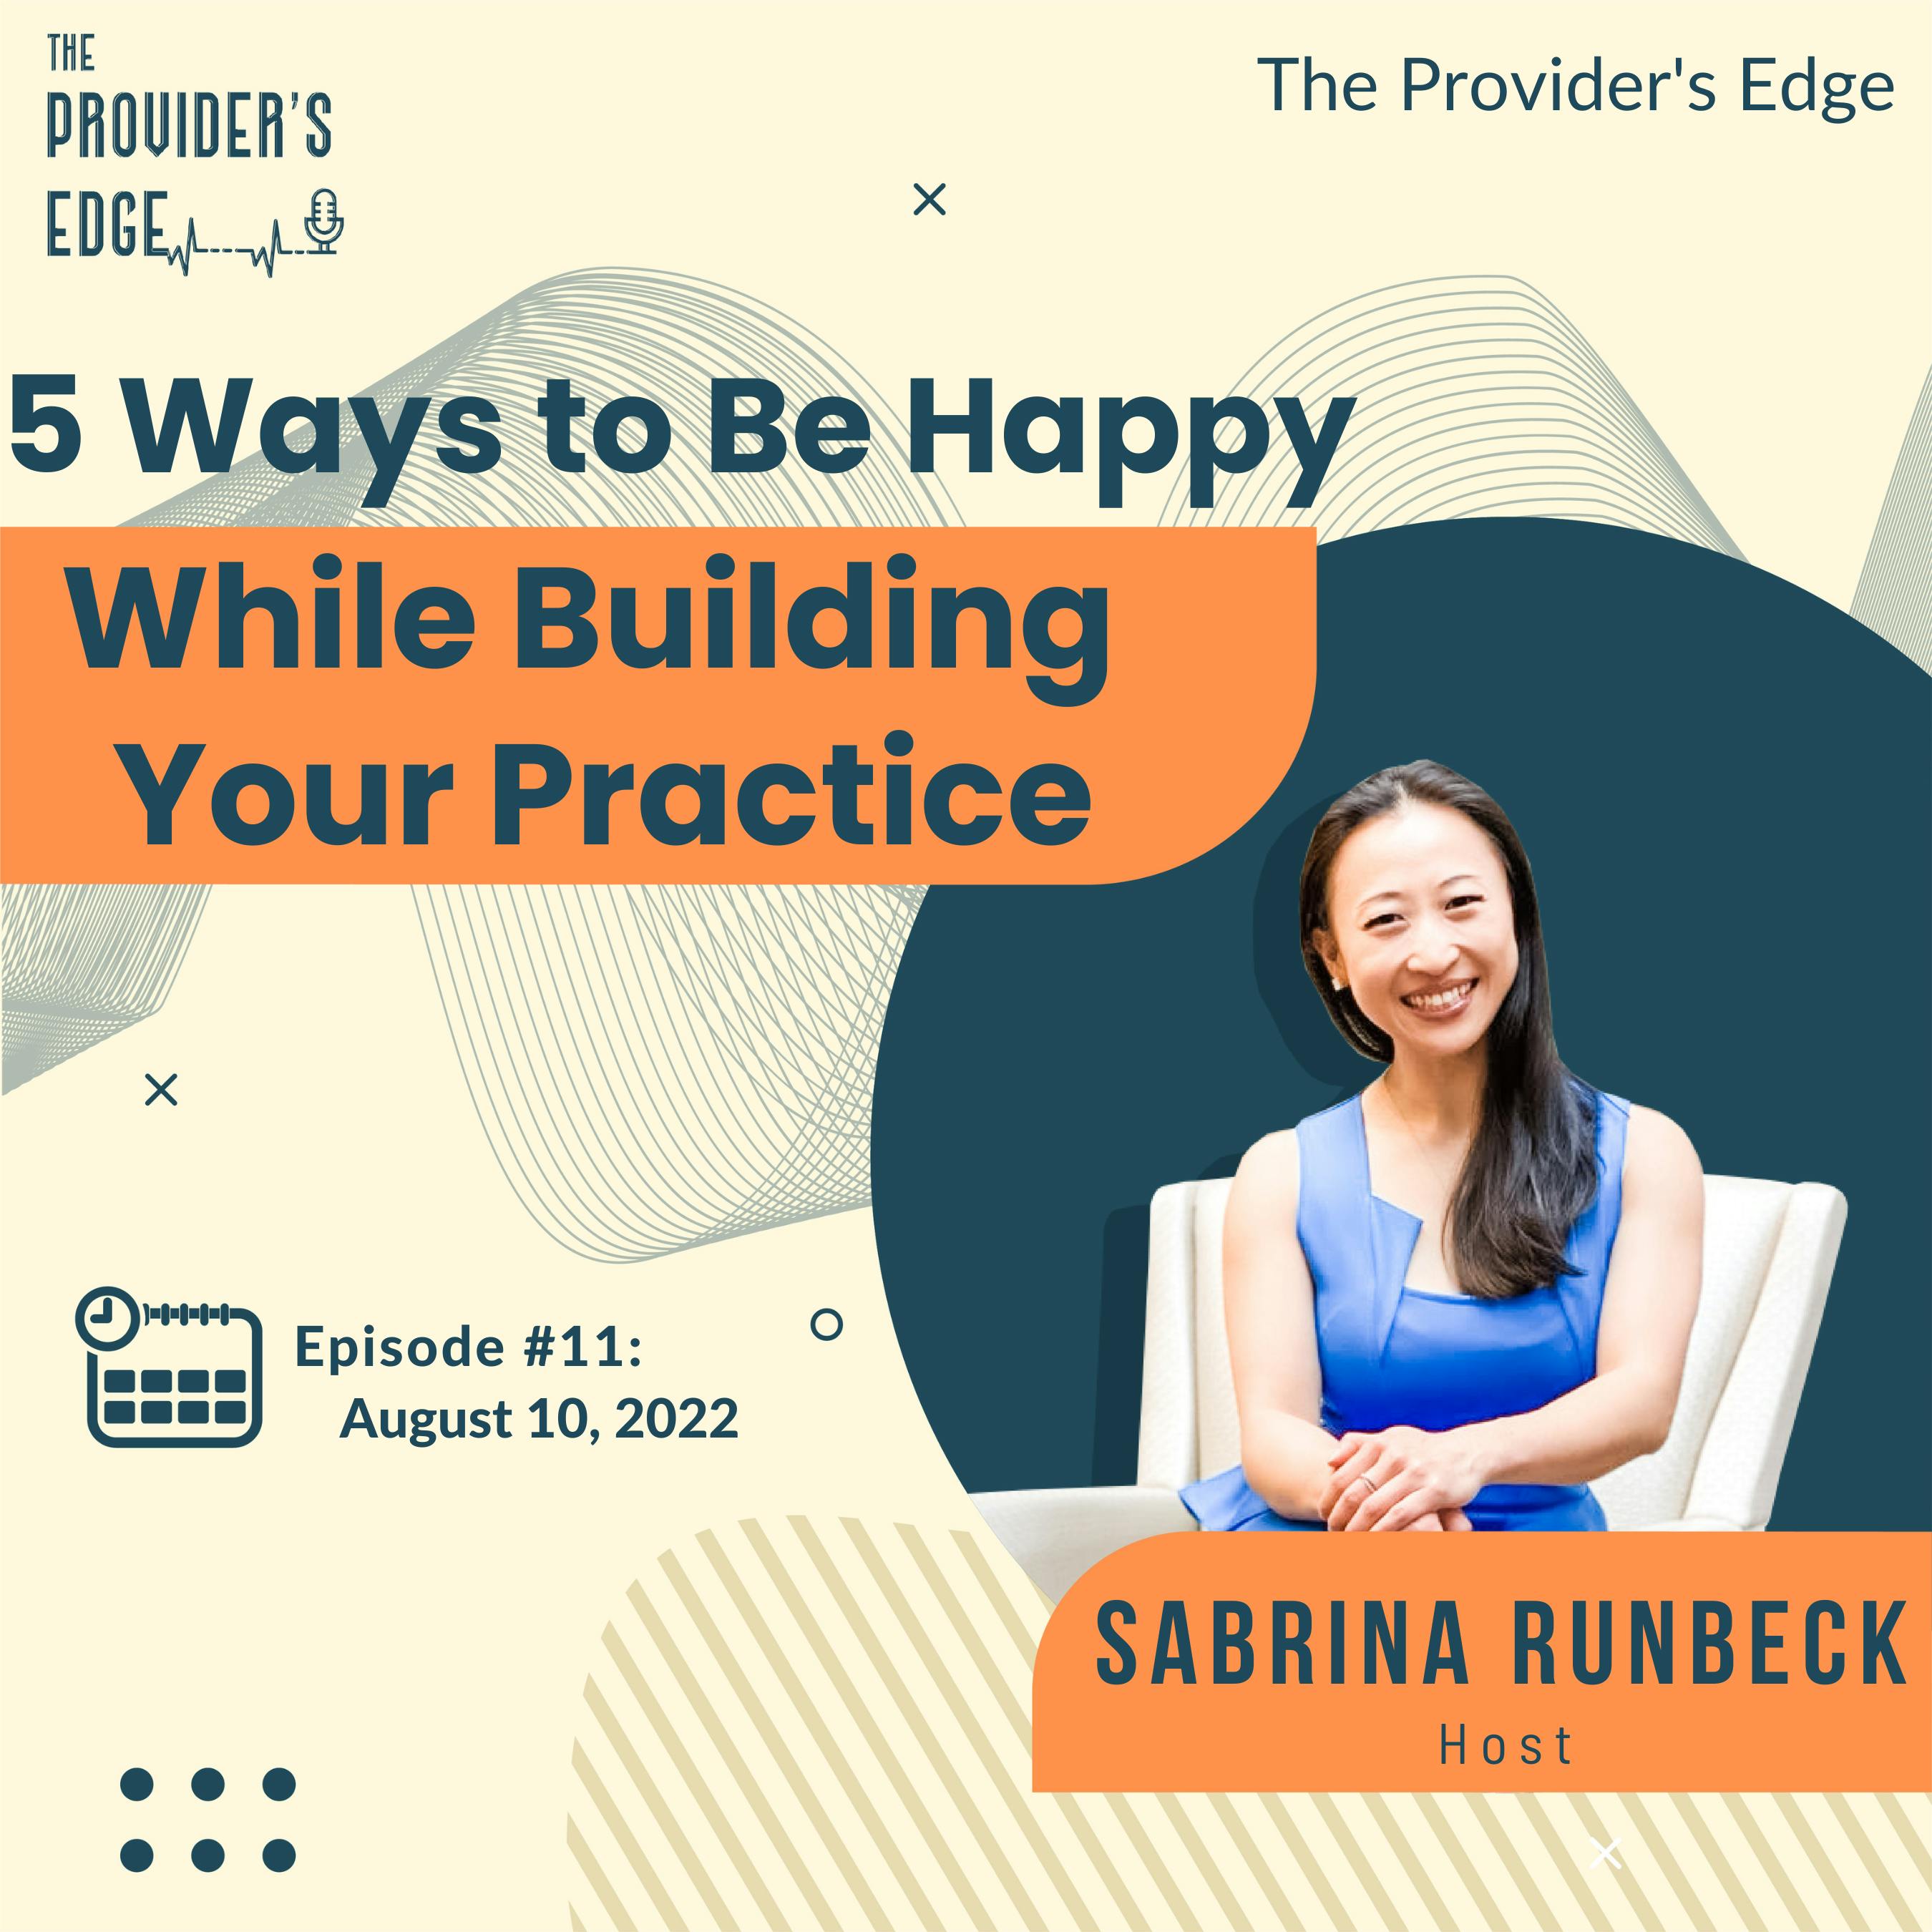 5 Ways to Be Happy While Building Your Practice with Sabrina Runbeck Ep 11